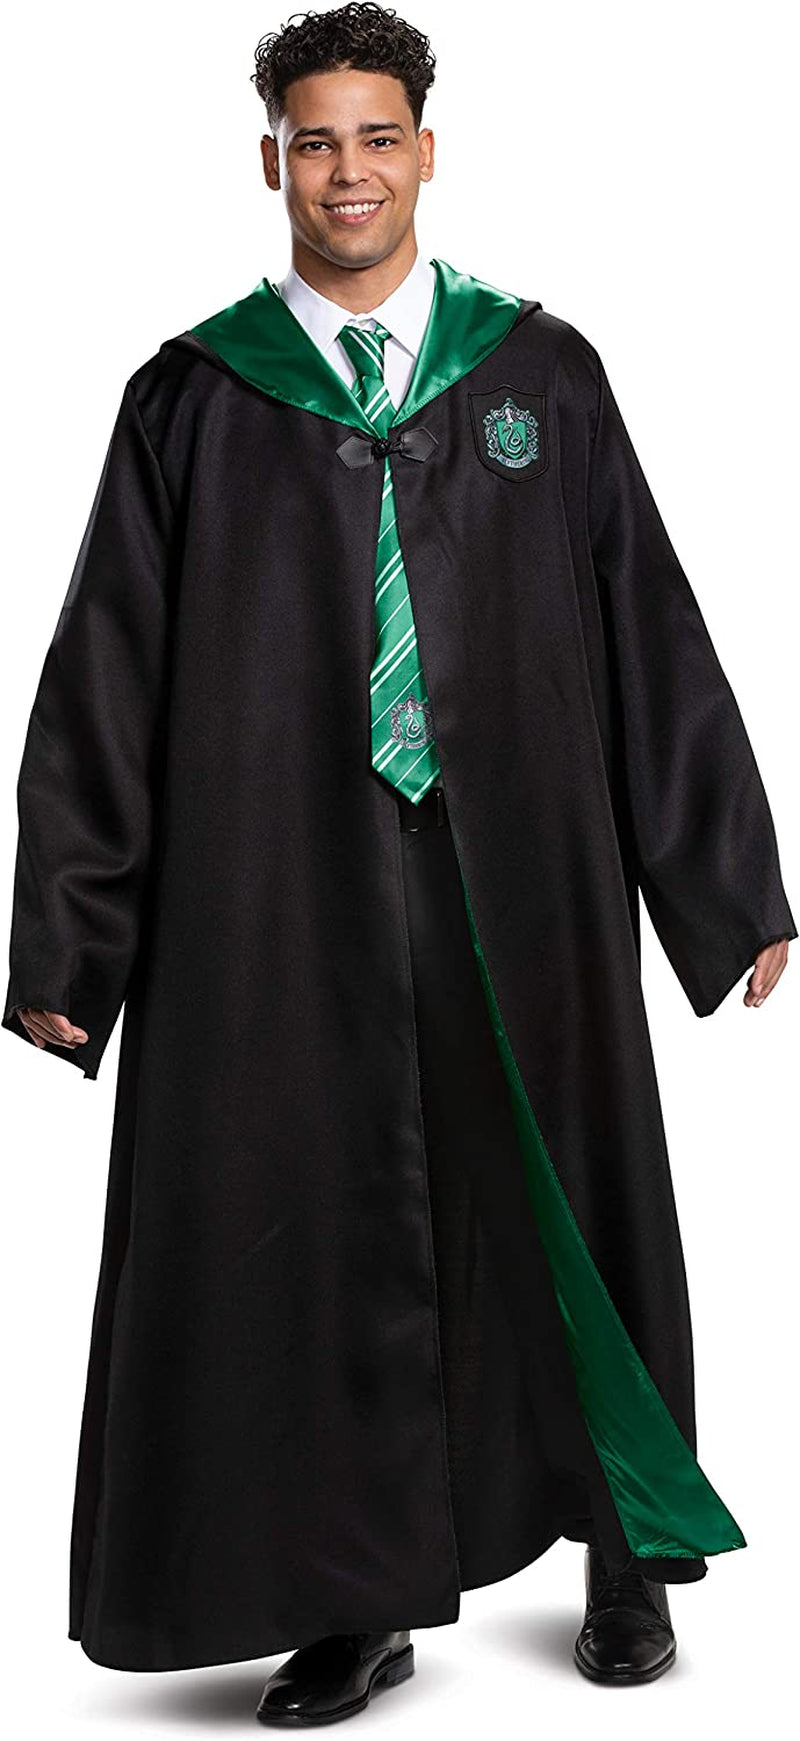 Harry Potter Robe, Deluxe Wizarding World Hogwarts House Themed Robes for Adults, Movie Quality Dress up Costume Accessory  Disguise Slytherin Teen Xl (14-16) 